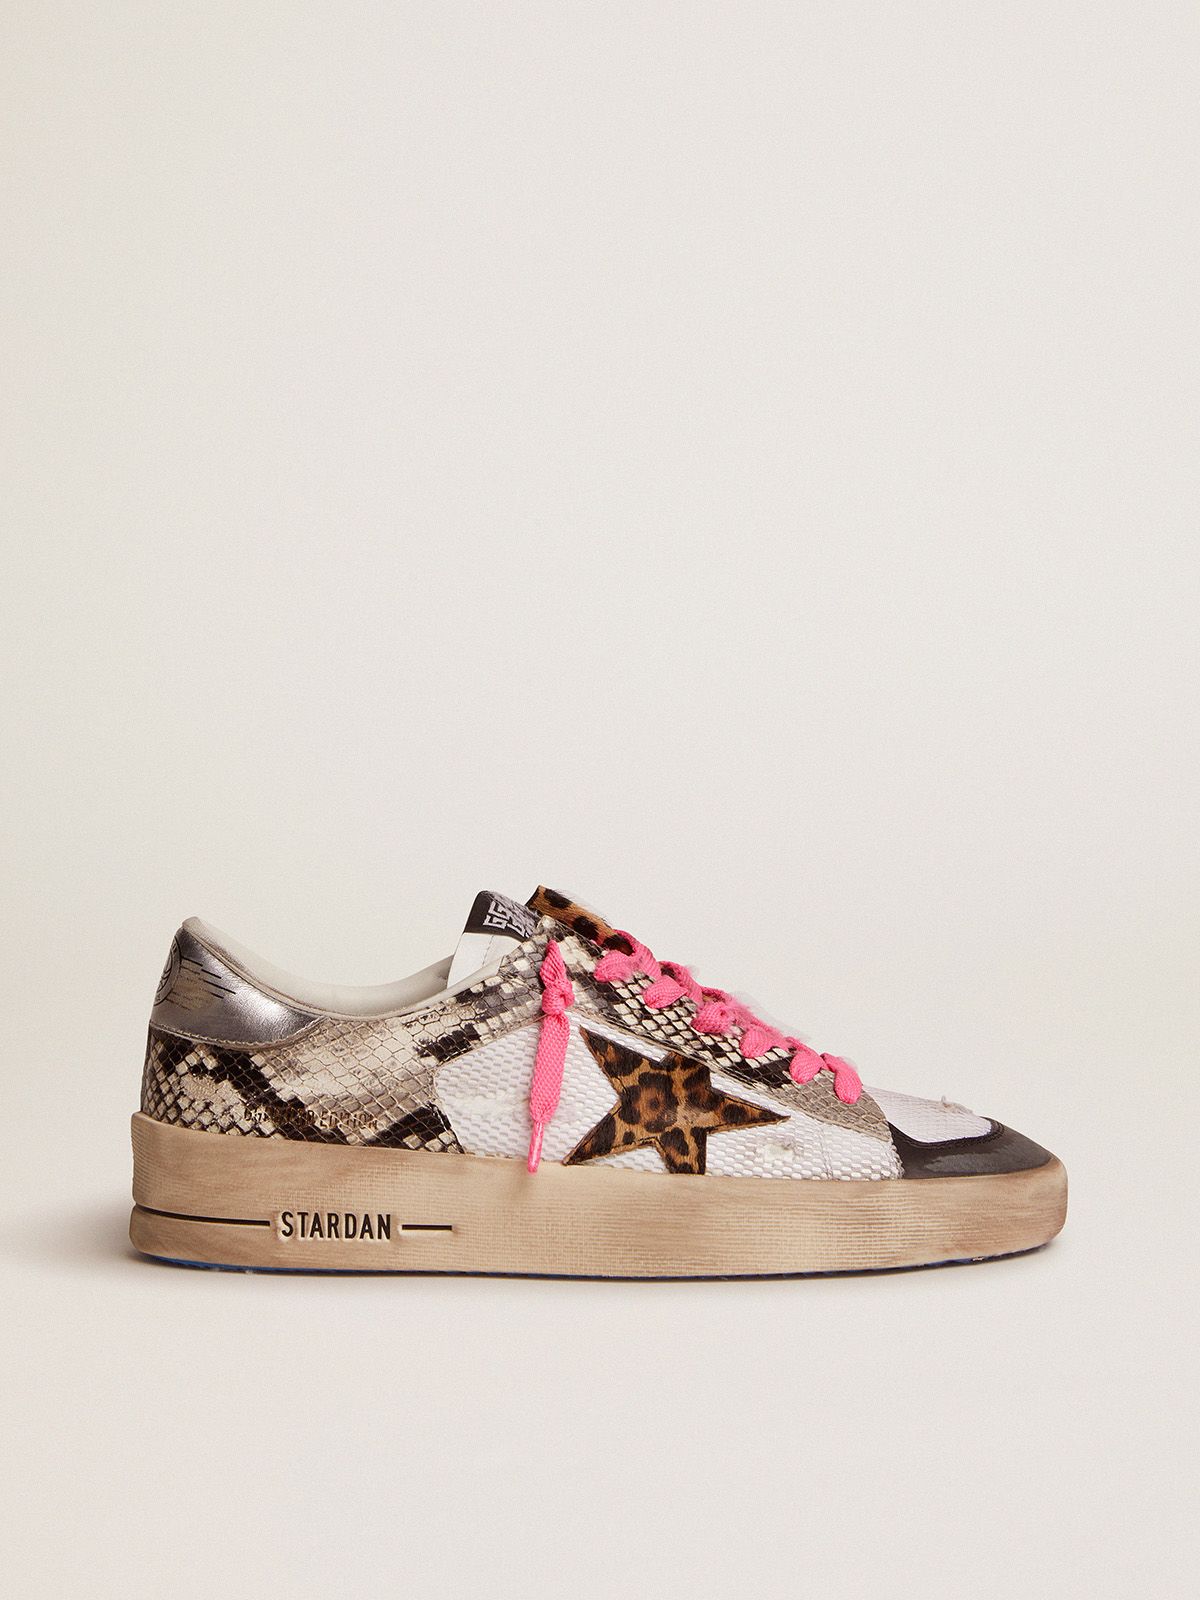 golden goose upper pony sneakers snake-print LAB skin leopard-print with Stardan star leather and